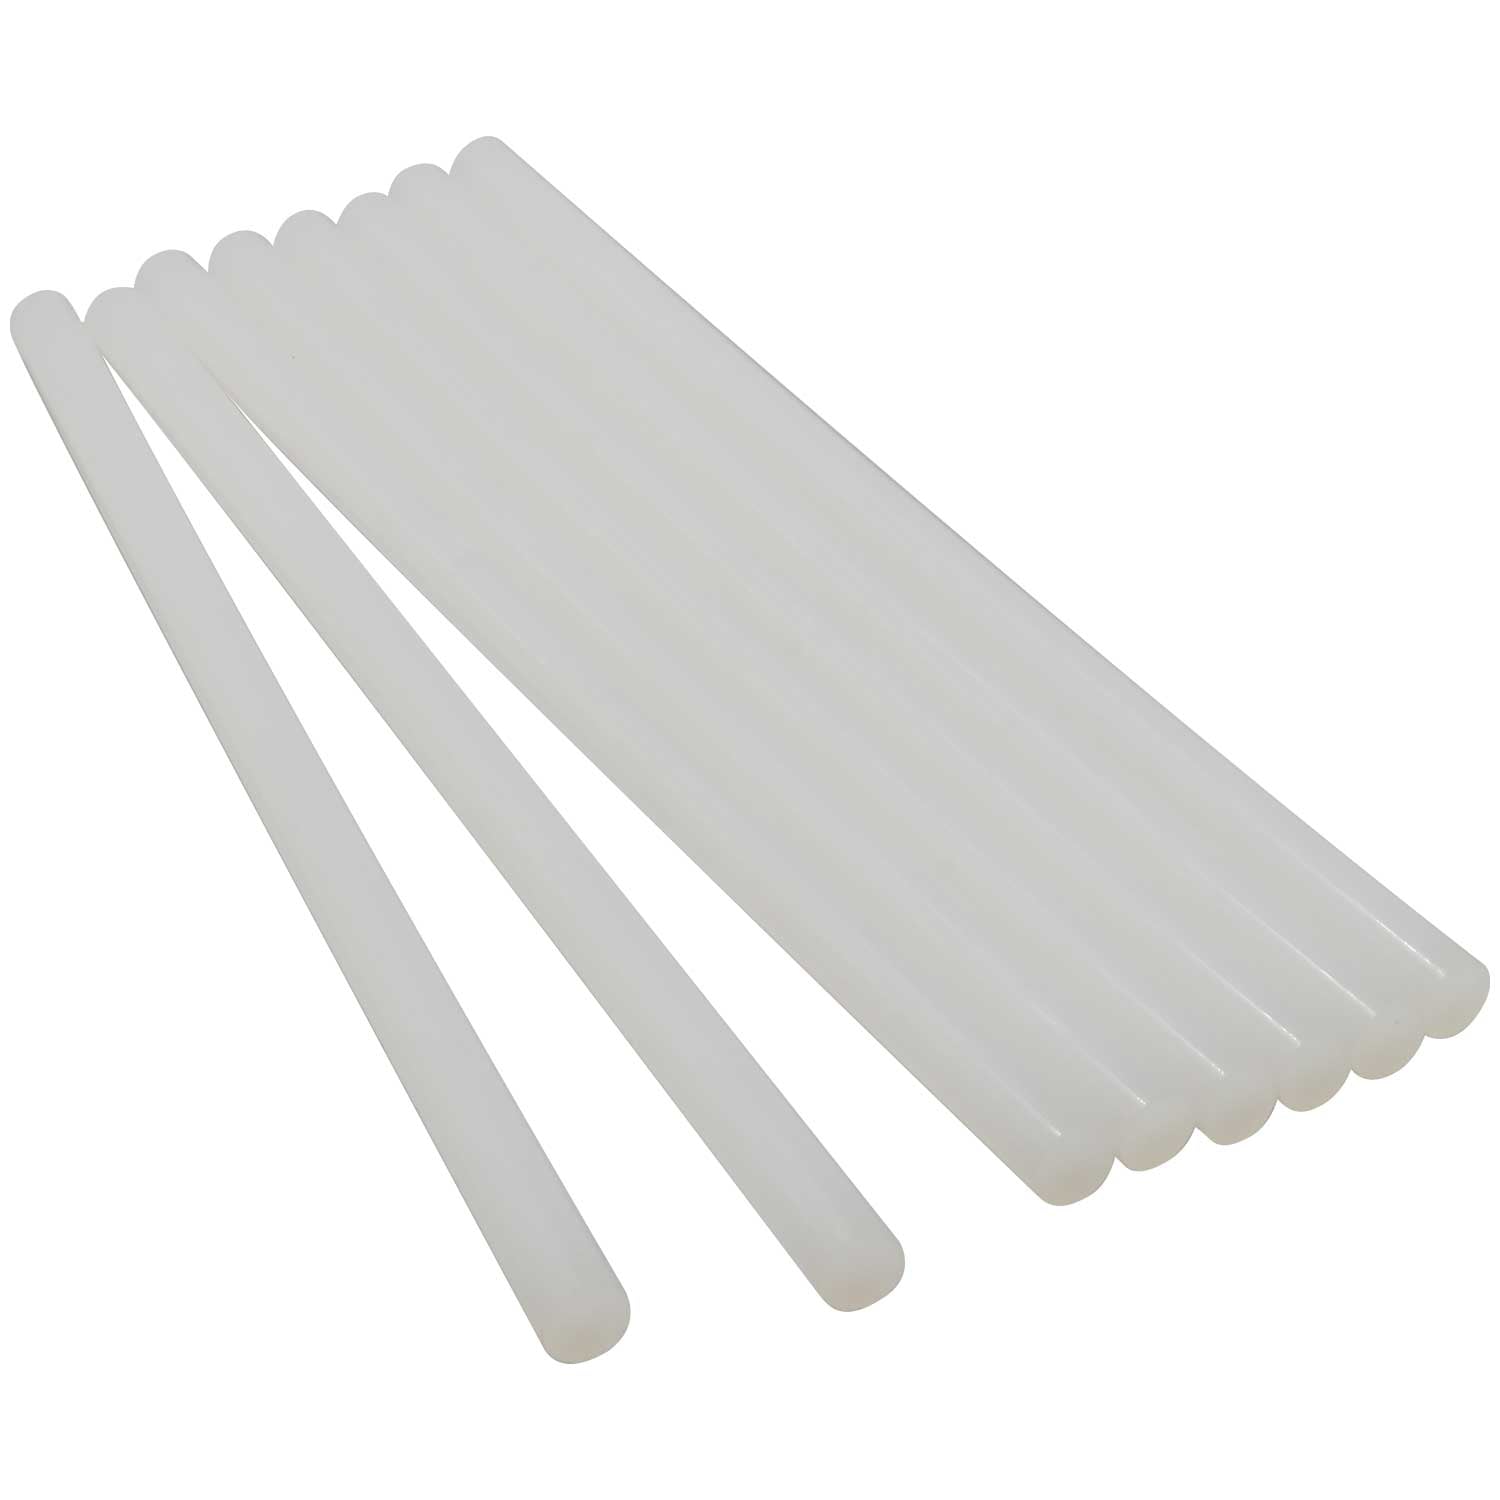 Clear Hot Glue Sticks For High & Low Temperatures, Full Size 10